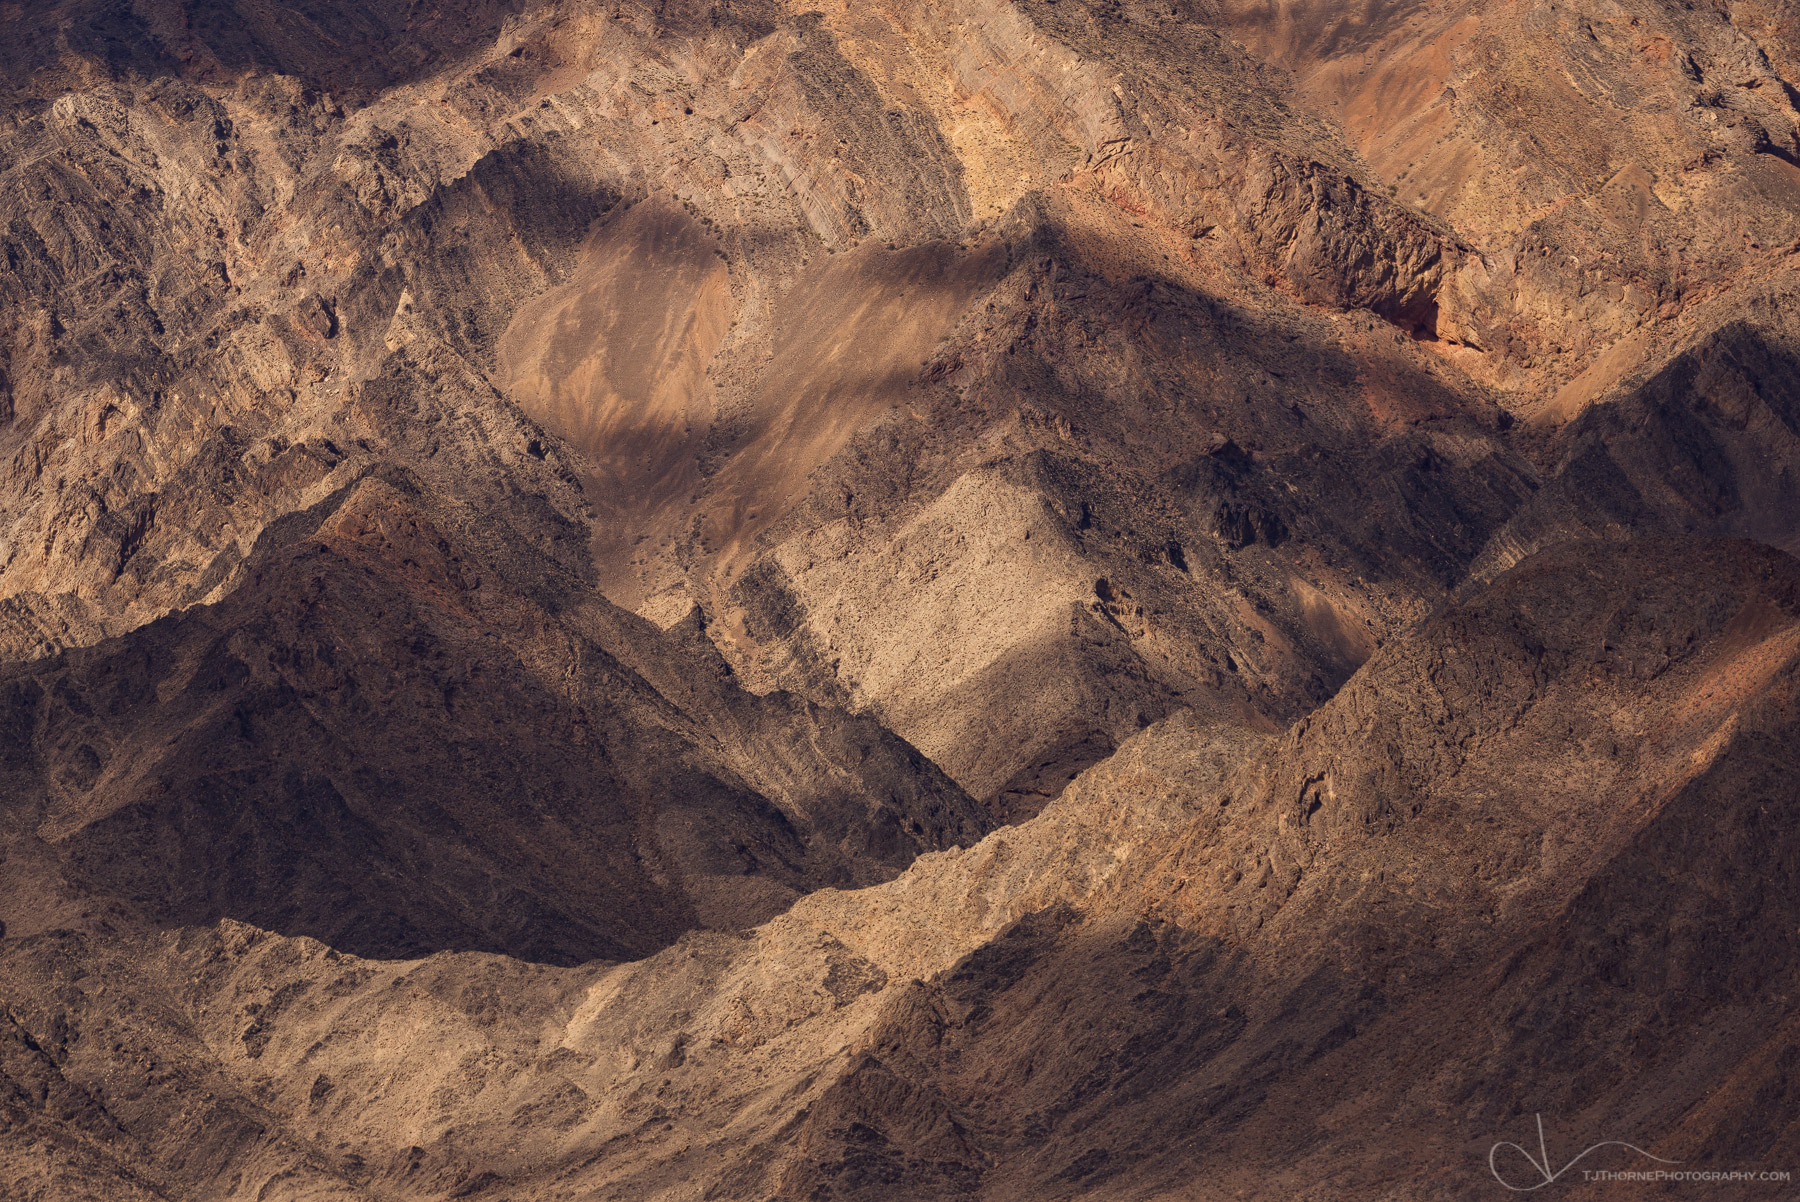 Dappled light on an intimate section of the Amargosa Mountains in Death Valley National Park.